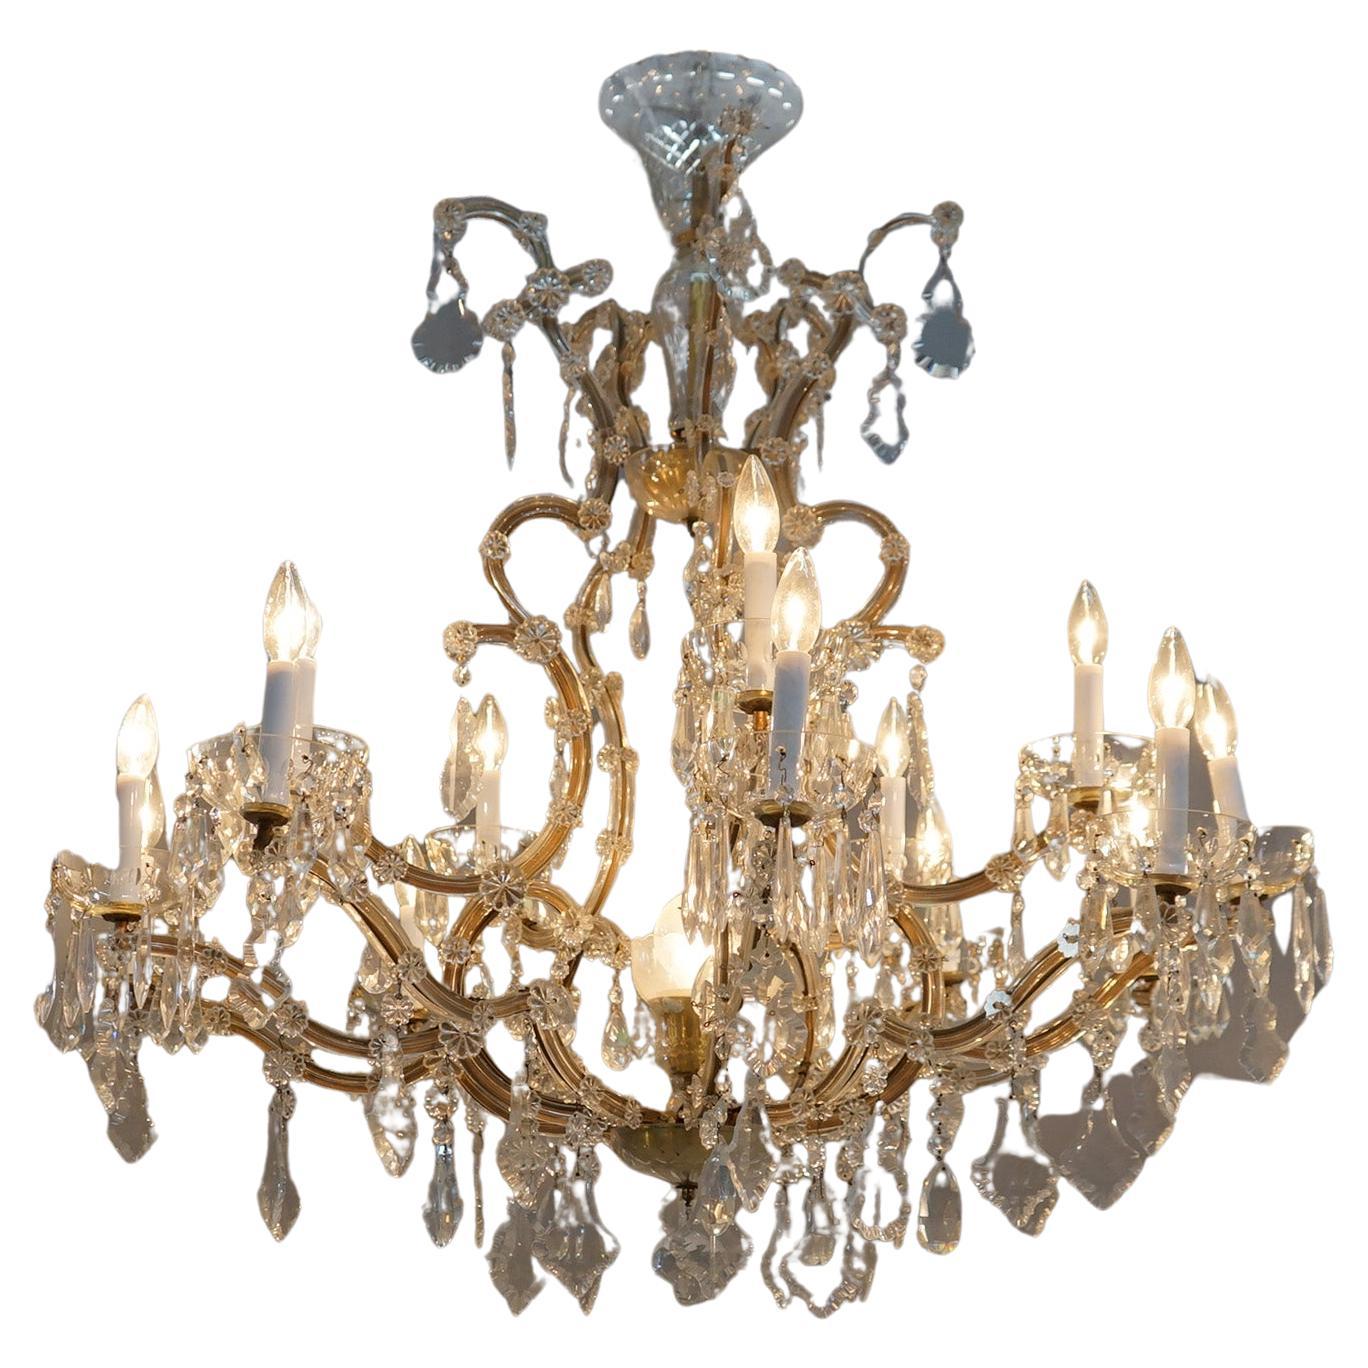 ***Ask About Reduced In-House Shipping Rates - Reliable Service & Fully Insured***
An antique French Louis XIV style chandelier offers scroll form frame with arms terminating in candle lights and cut crystals throughout, c1930

Measures- 71''H x